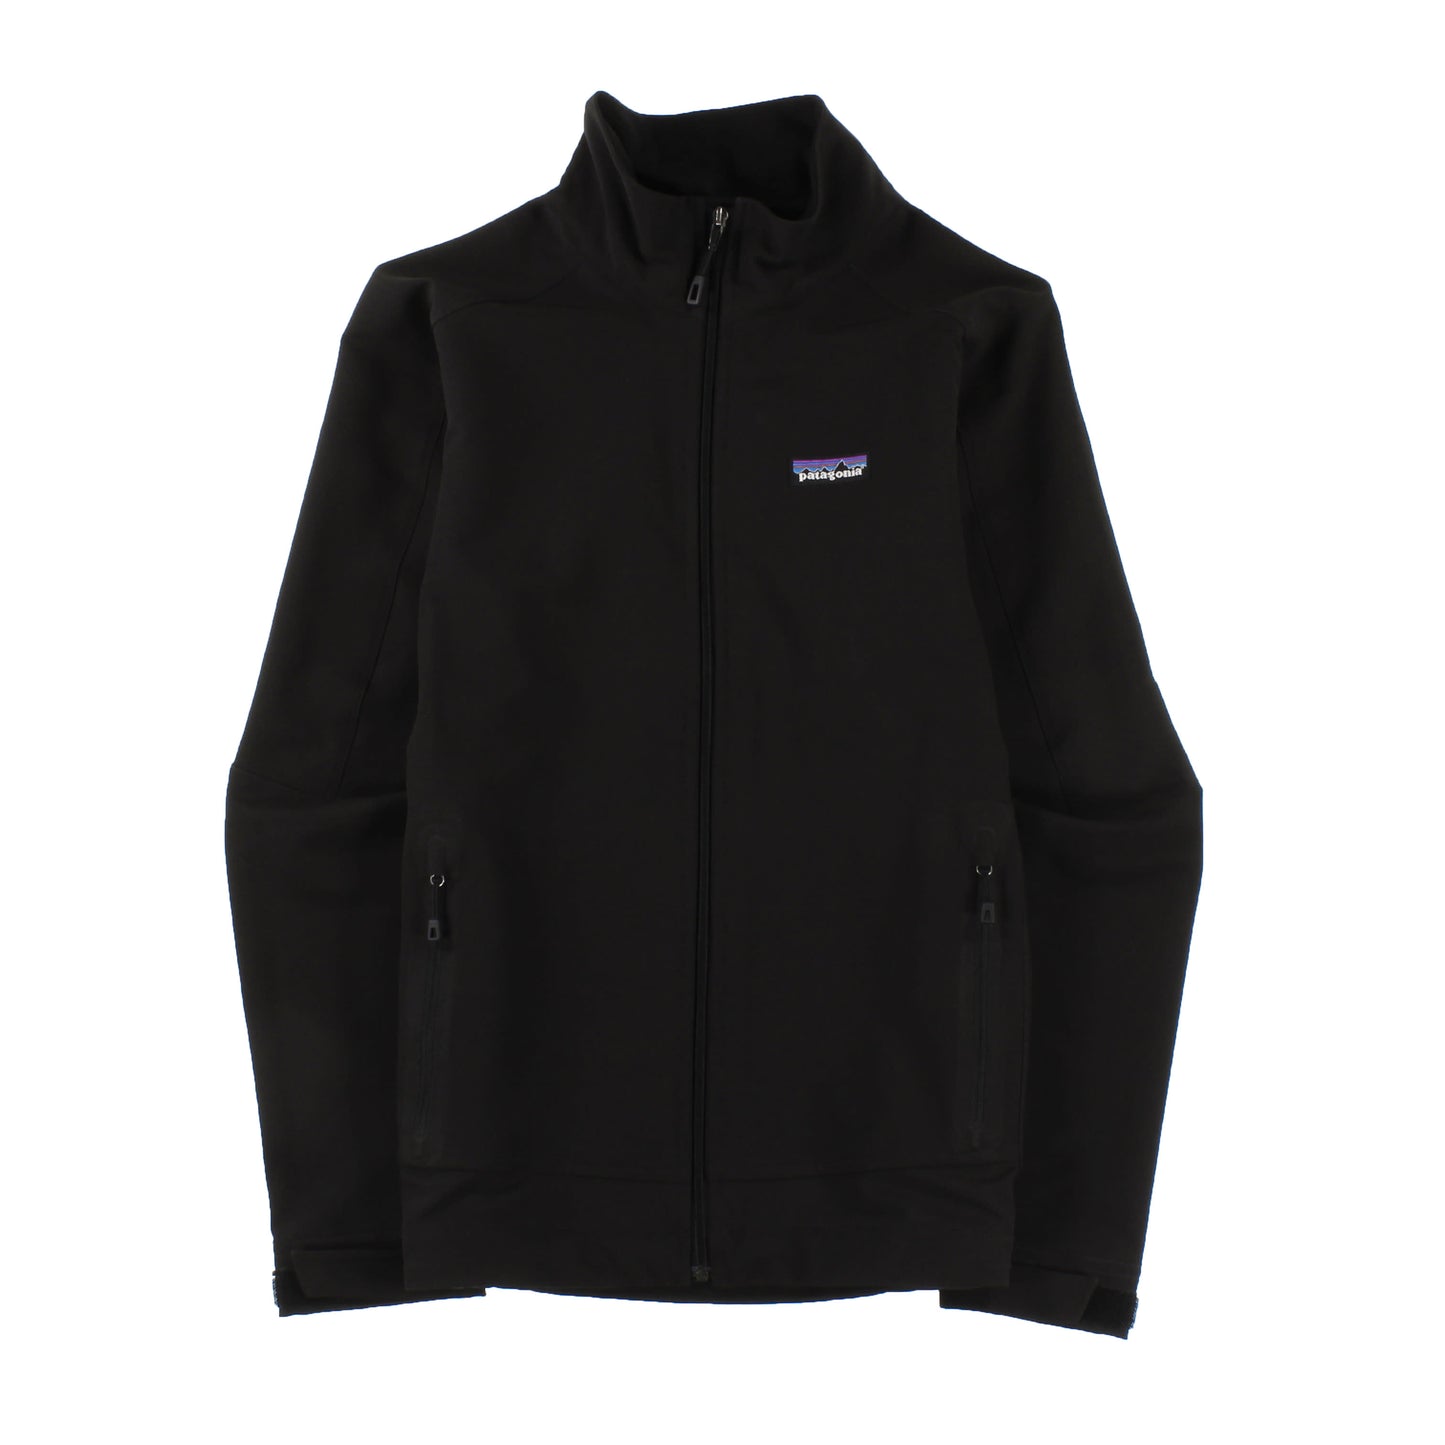 W's Simple Guide Jacket